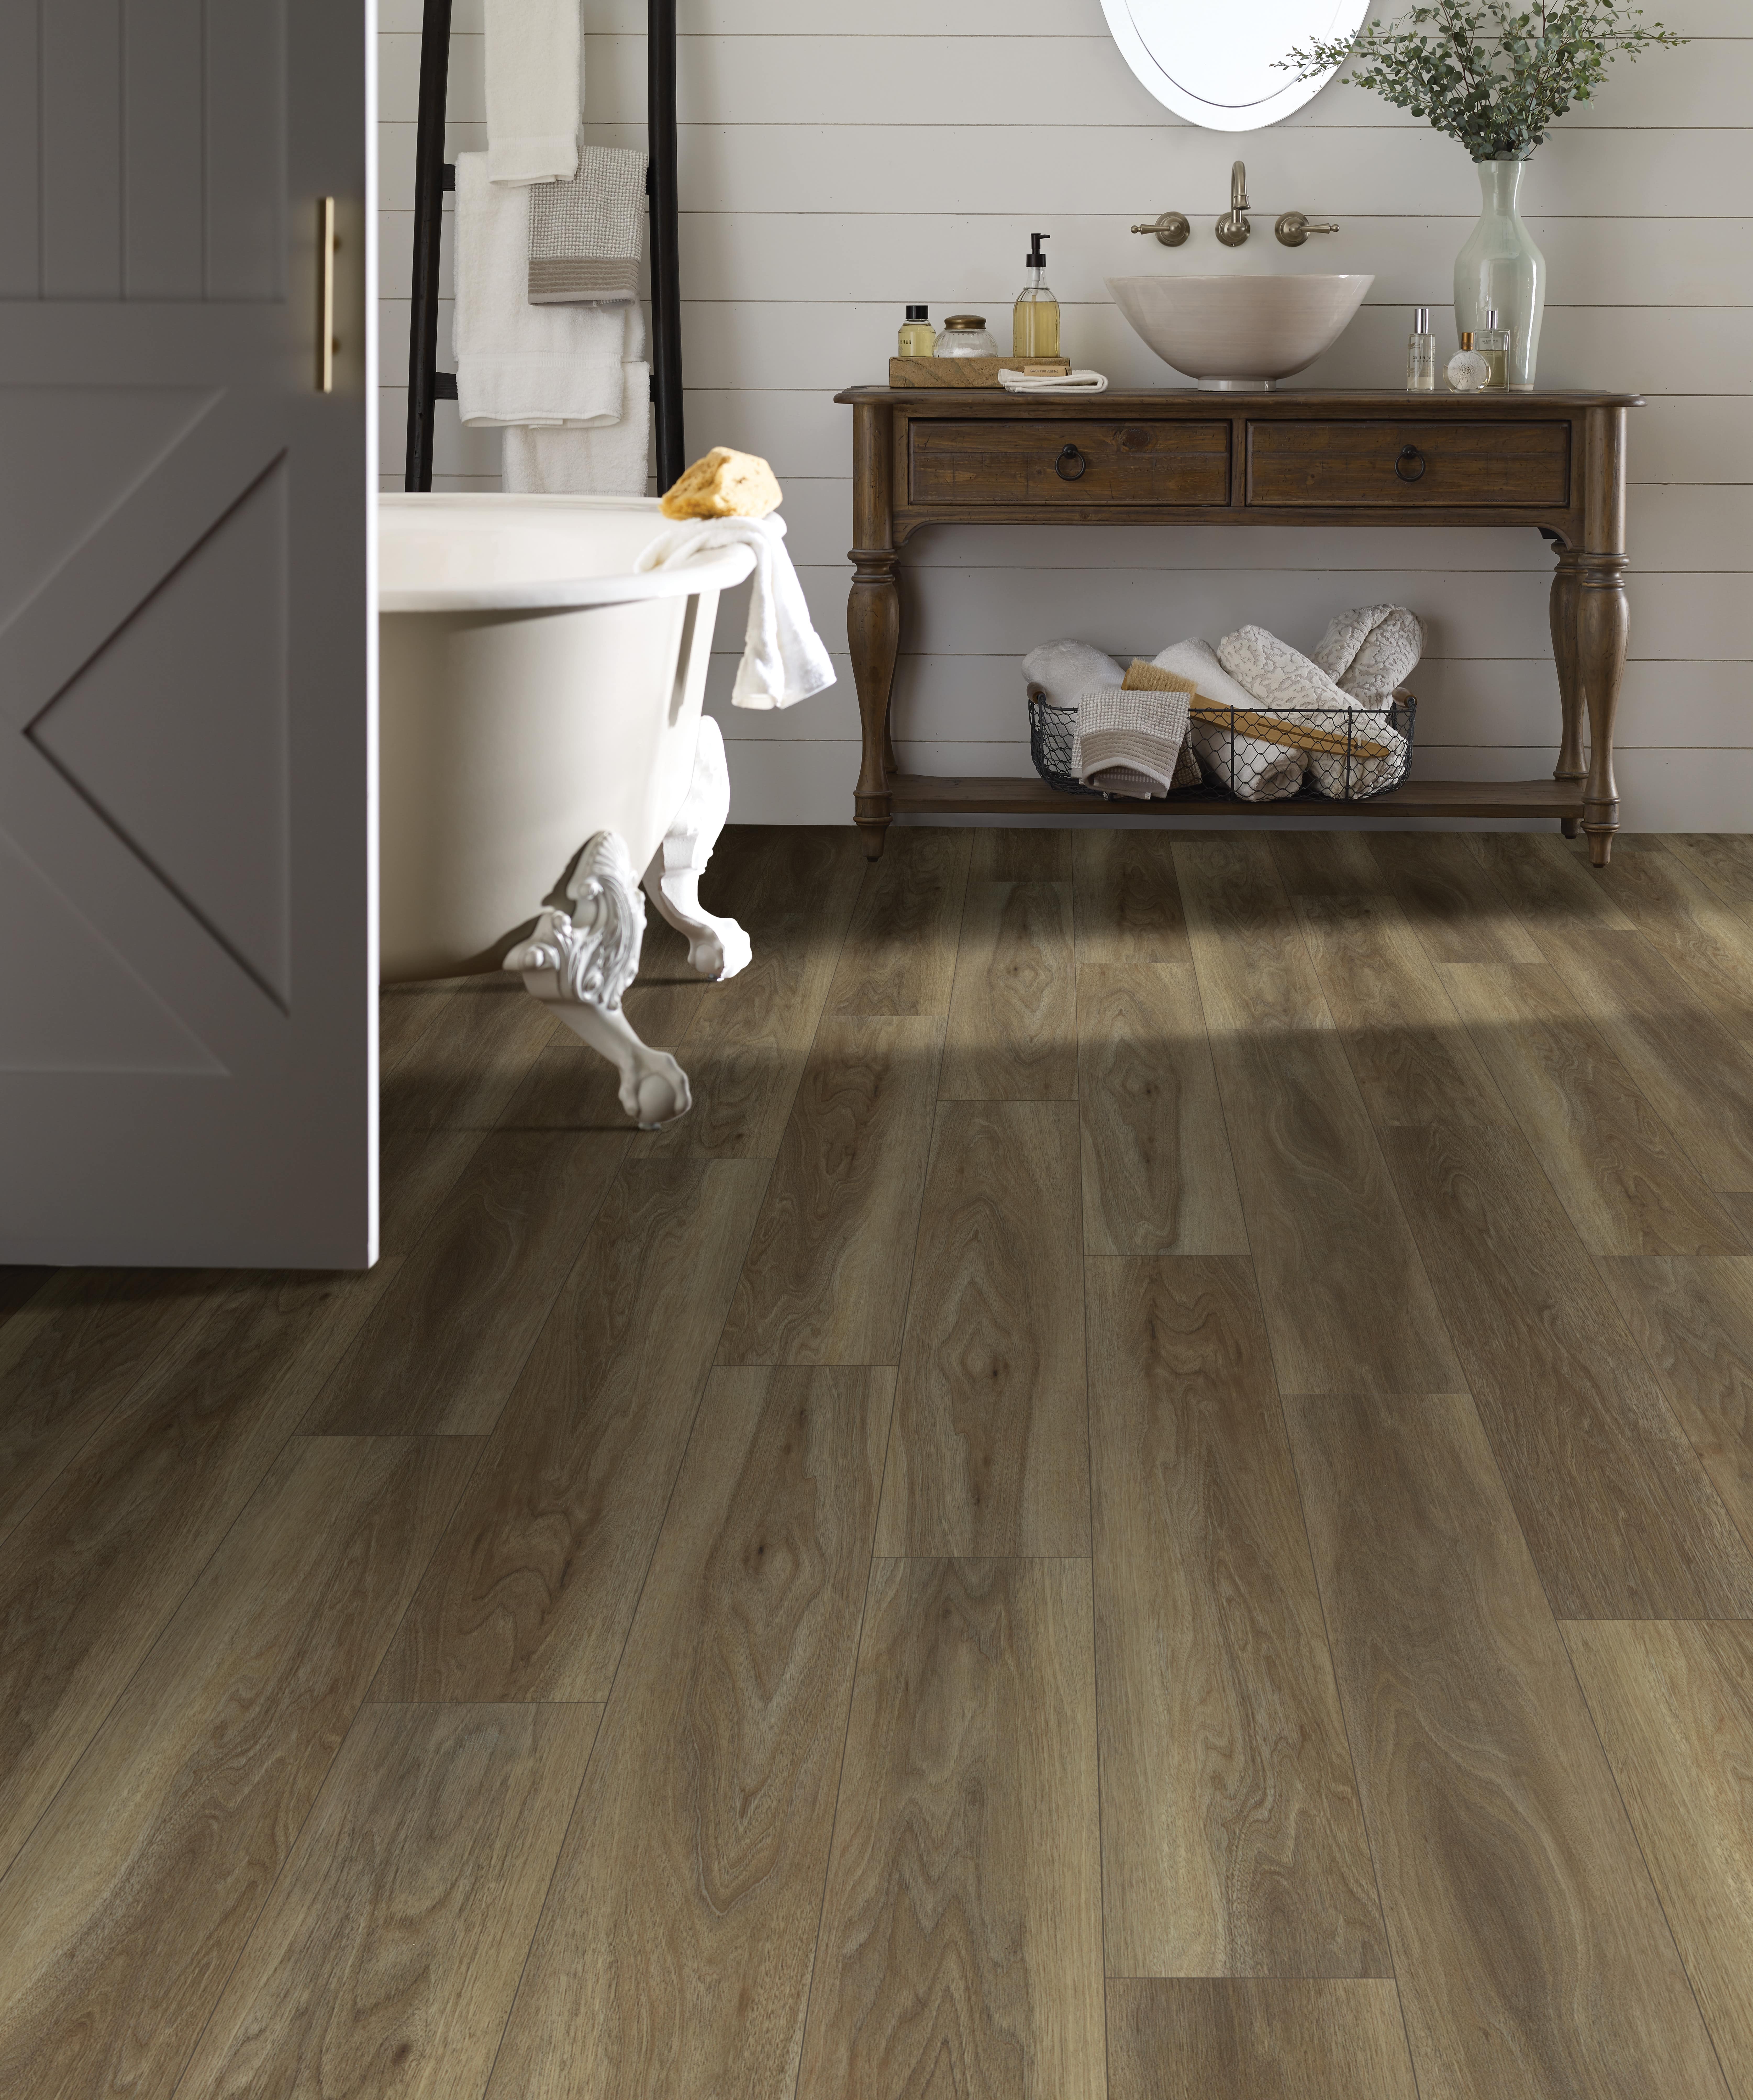 Wood Floor Bathrooms How To Do Them, How To Install Laminate Tile Flooring In Bathroom